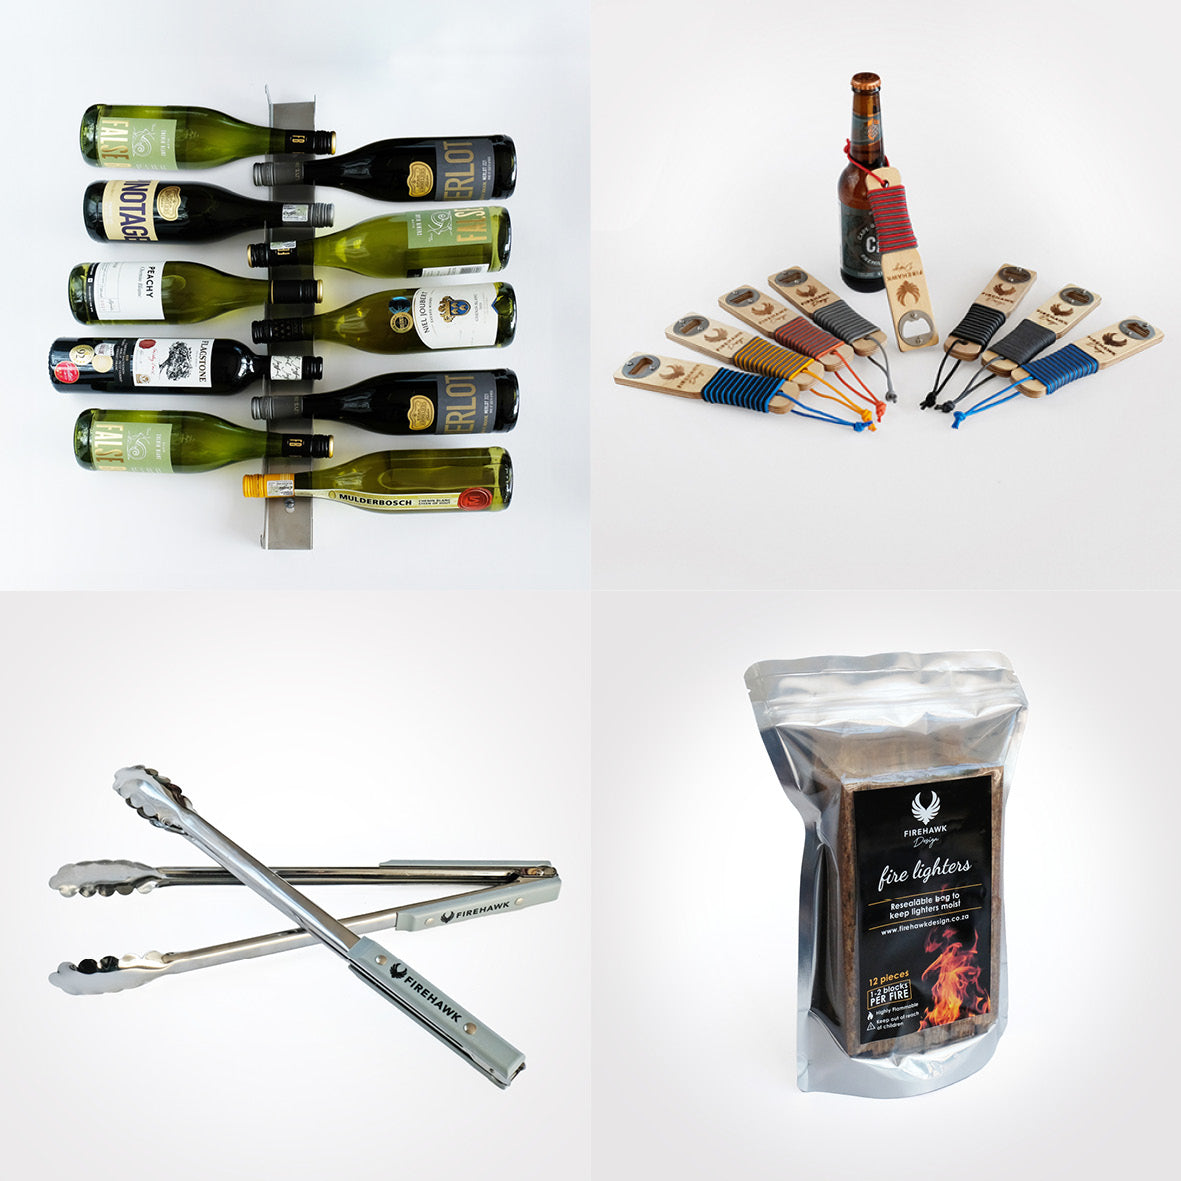 Lifestyle Products / Tongs / Wine Rack / Pizza Boards